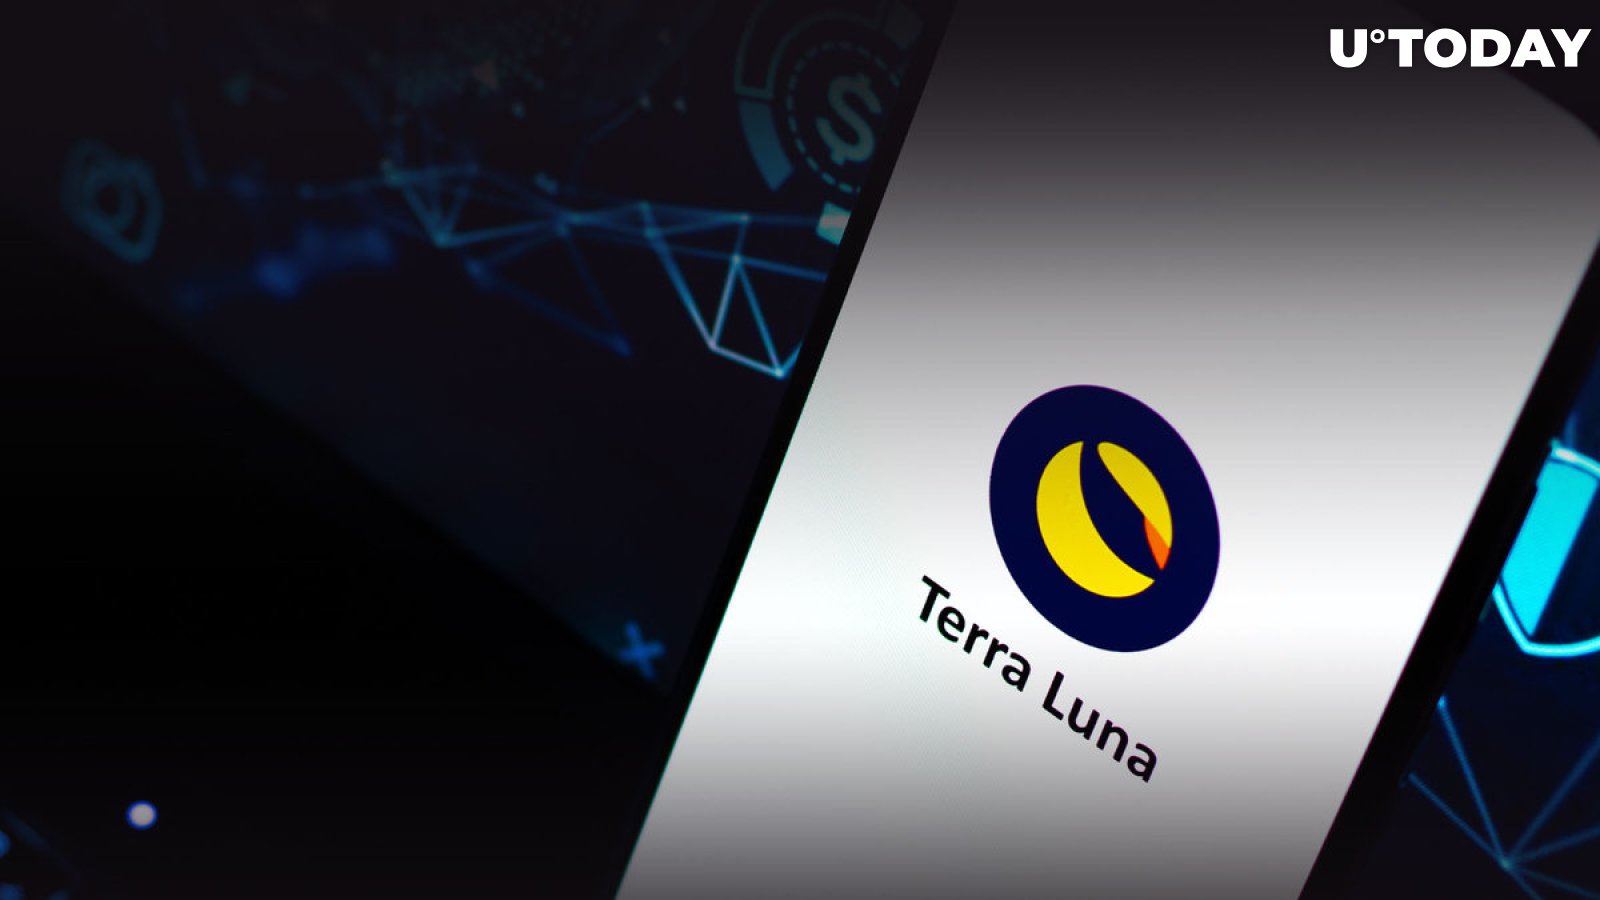 New Terra LUNA Records 3,300% Spike in Trading Volumes as Price Triples, What Is Happening?